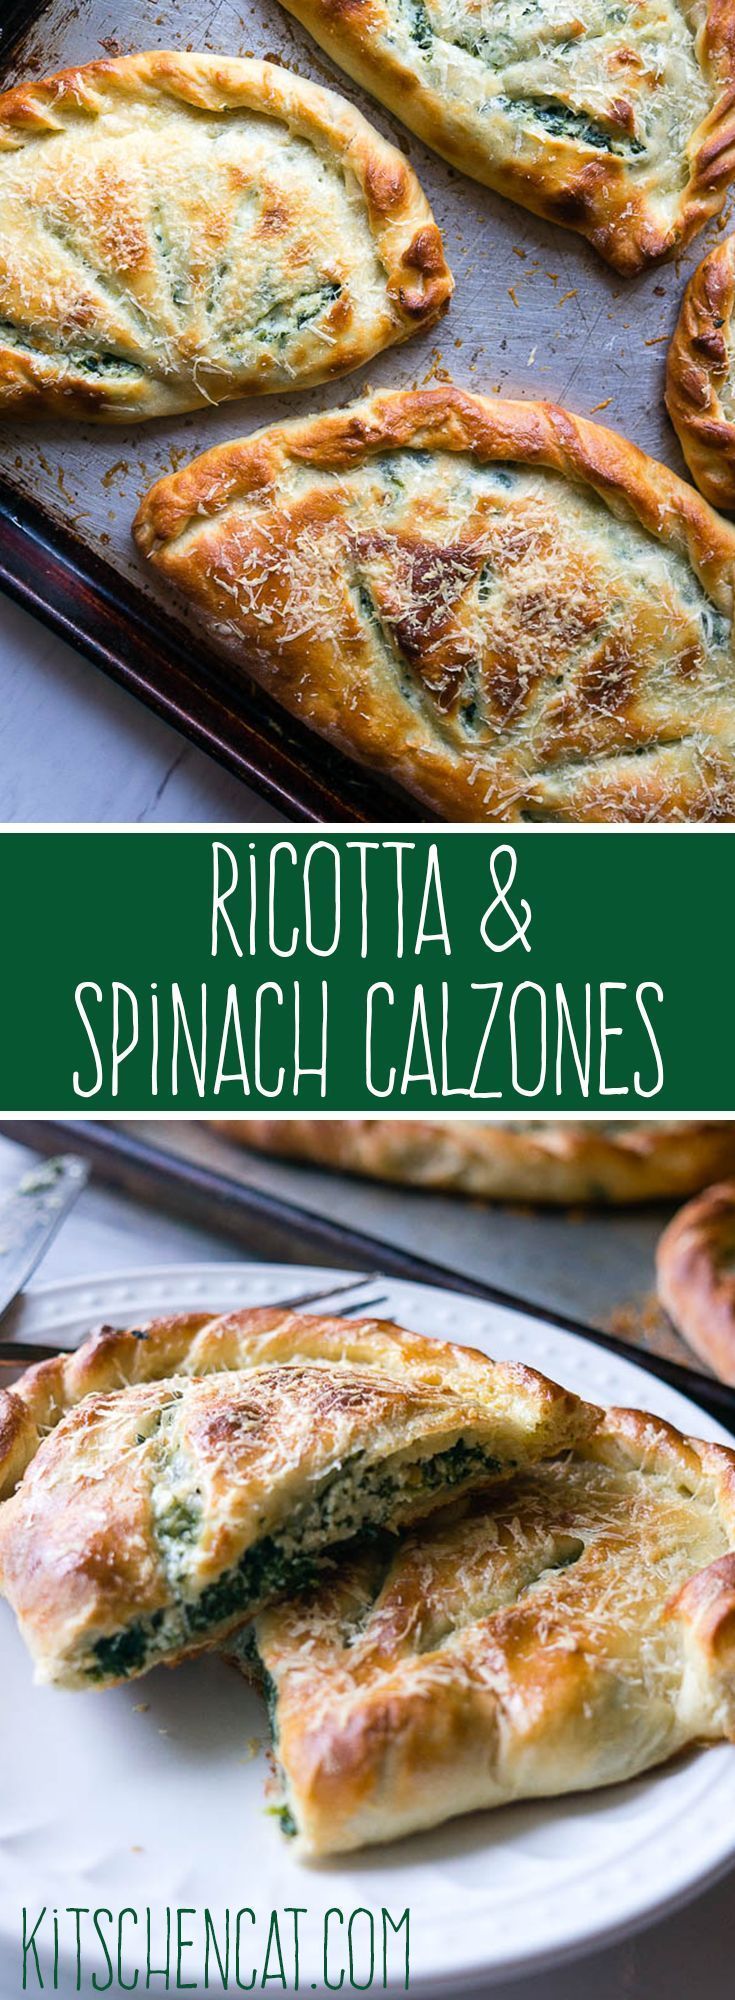 Ricotta and Spinach Calzones. A cheesy vegetarian calzone to substitute into your pizza routine!